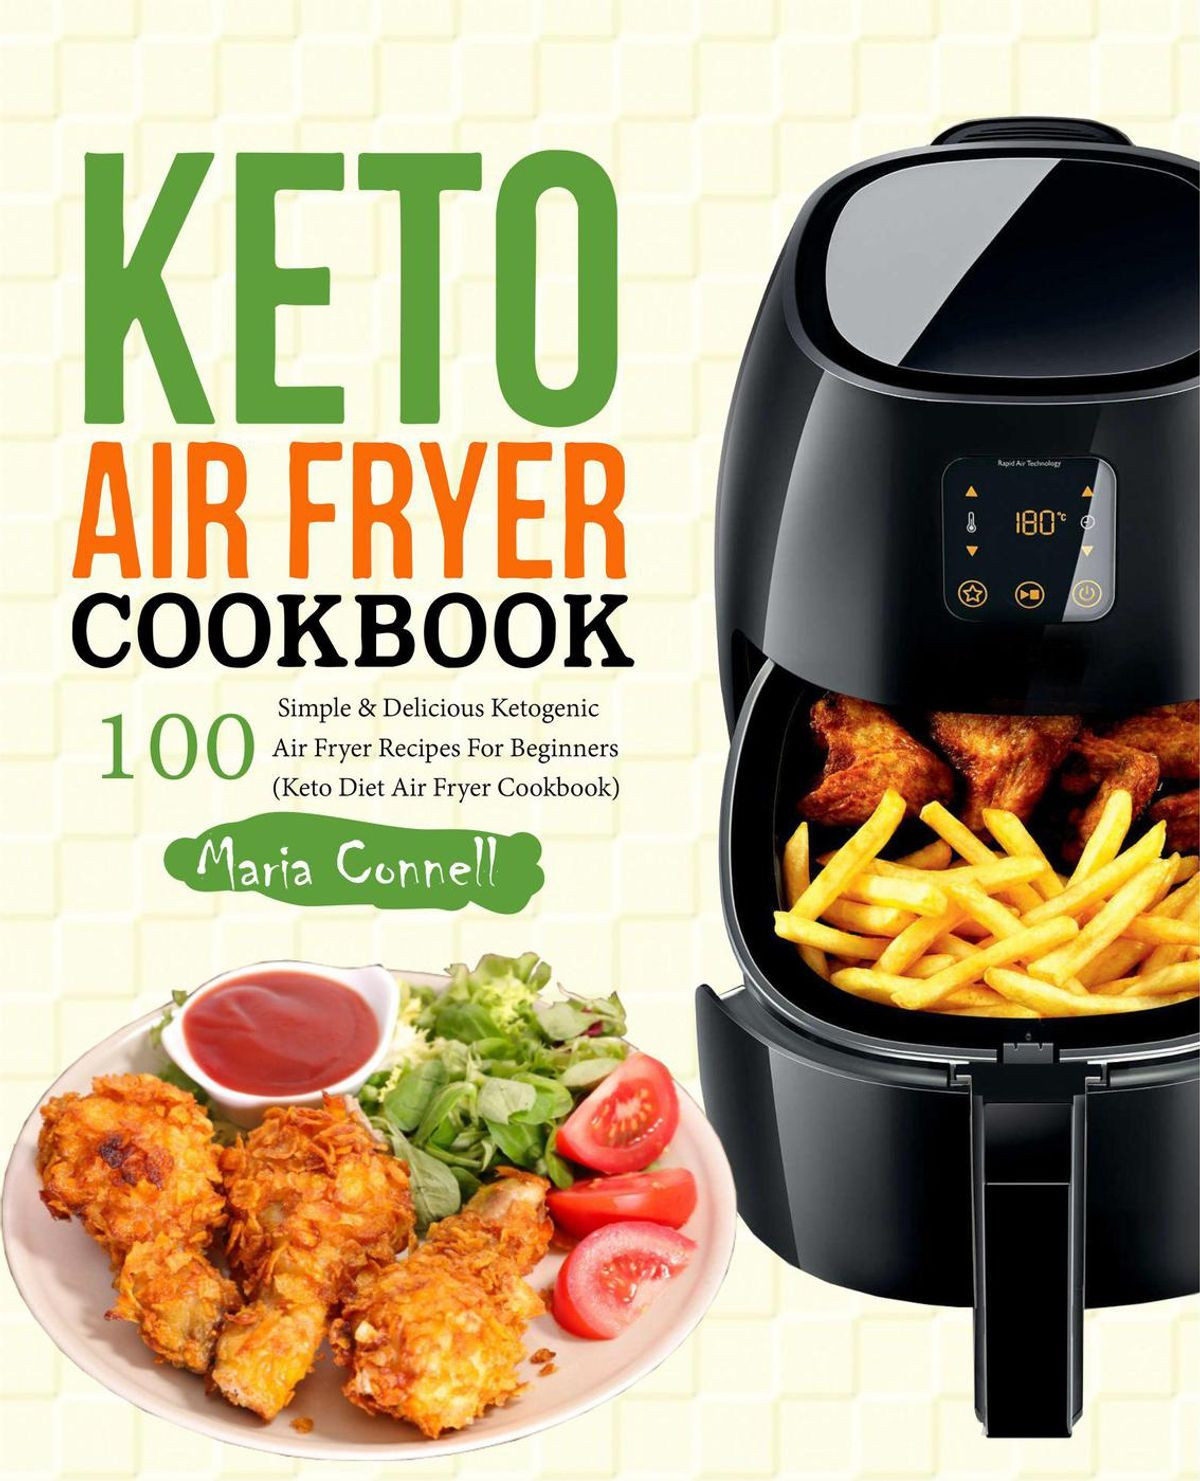 Keto Diet For Beginners Recipe Easy
 Keto Air Fryer Cookbook 100 Simple & Delicious Ketogenic